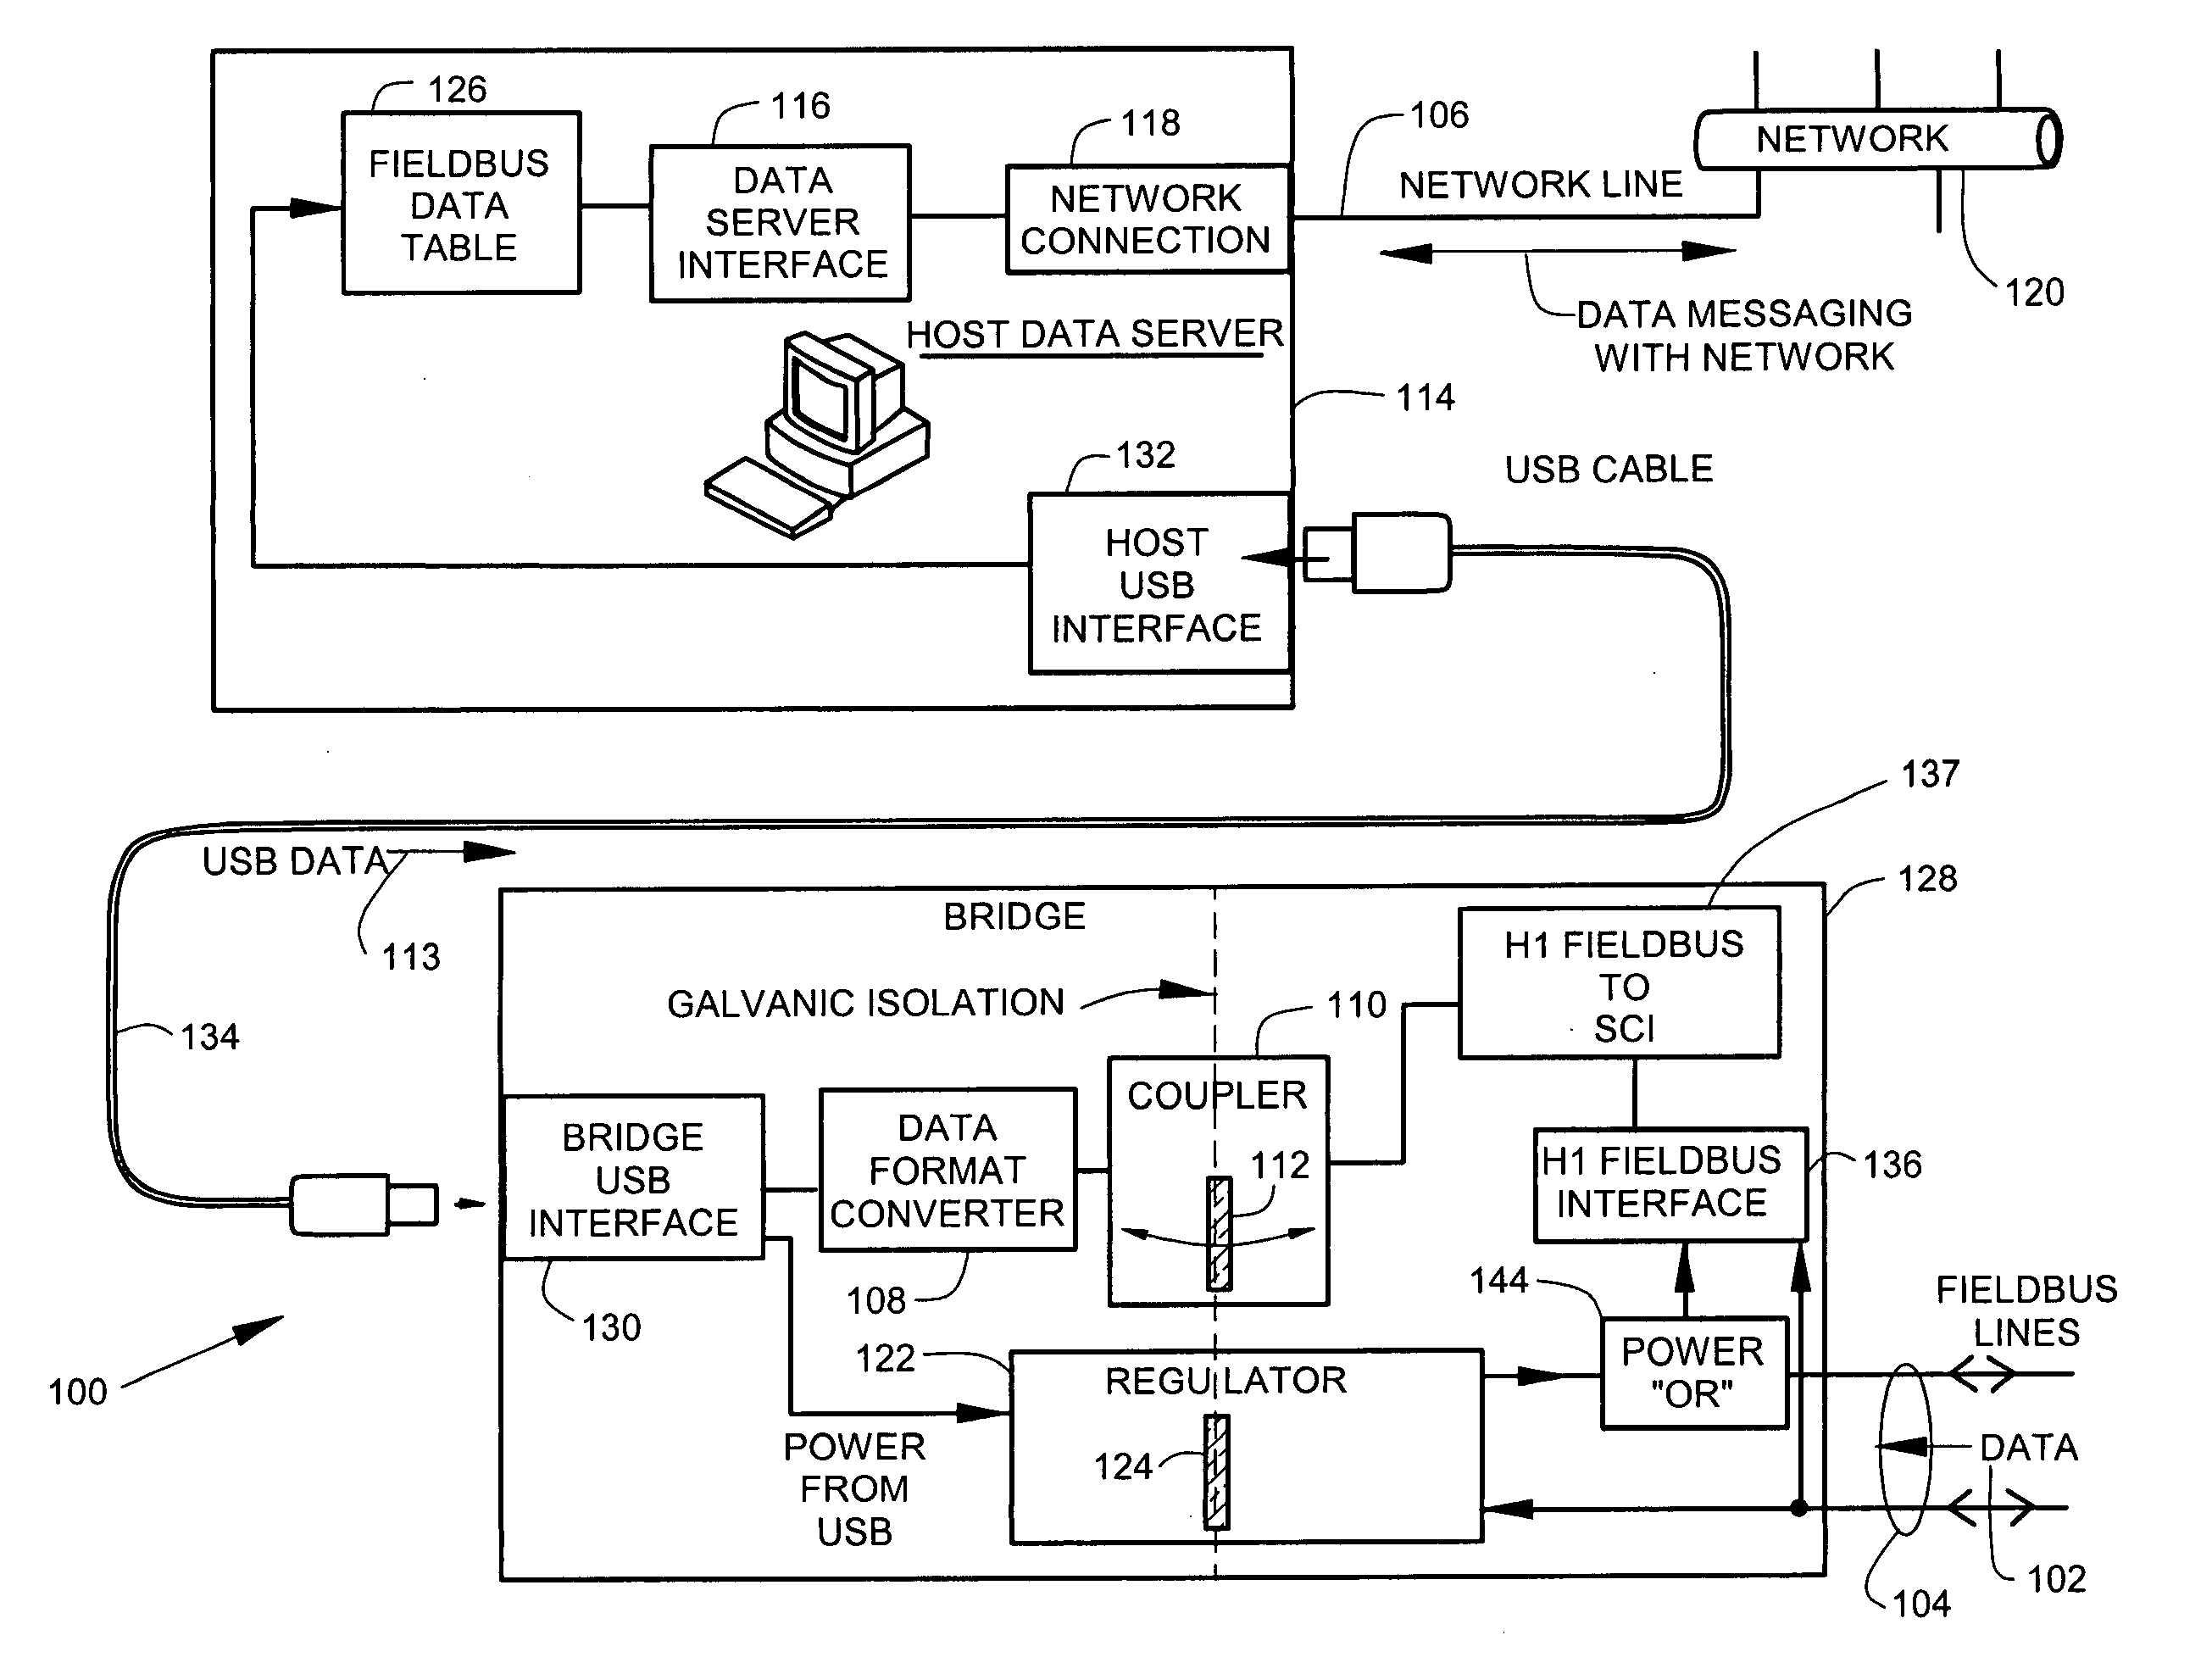 Isolating system that couples fieldbus data to a network